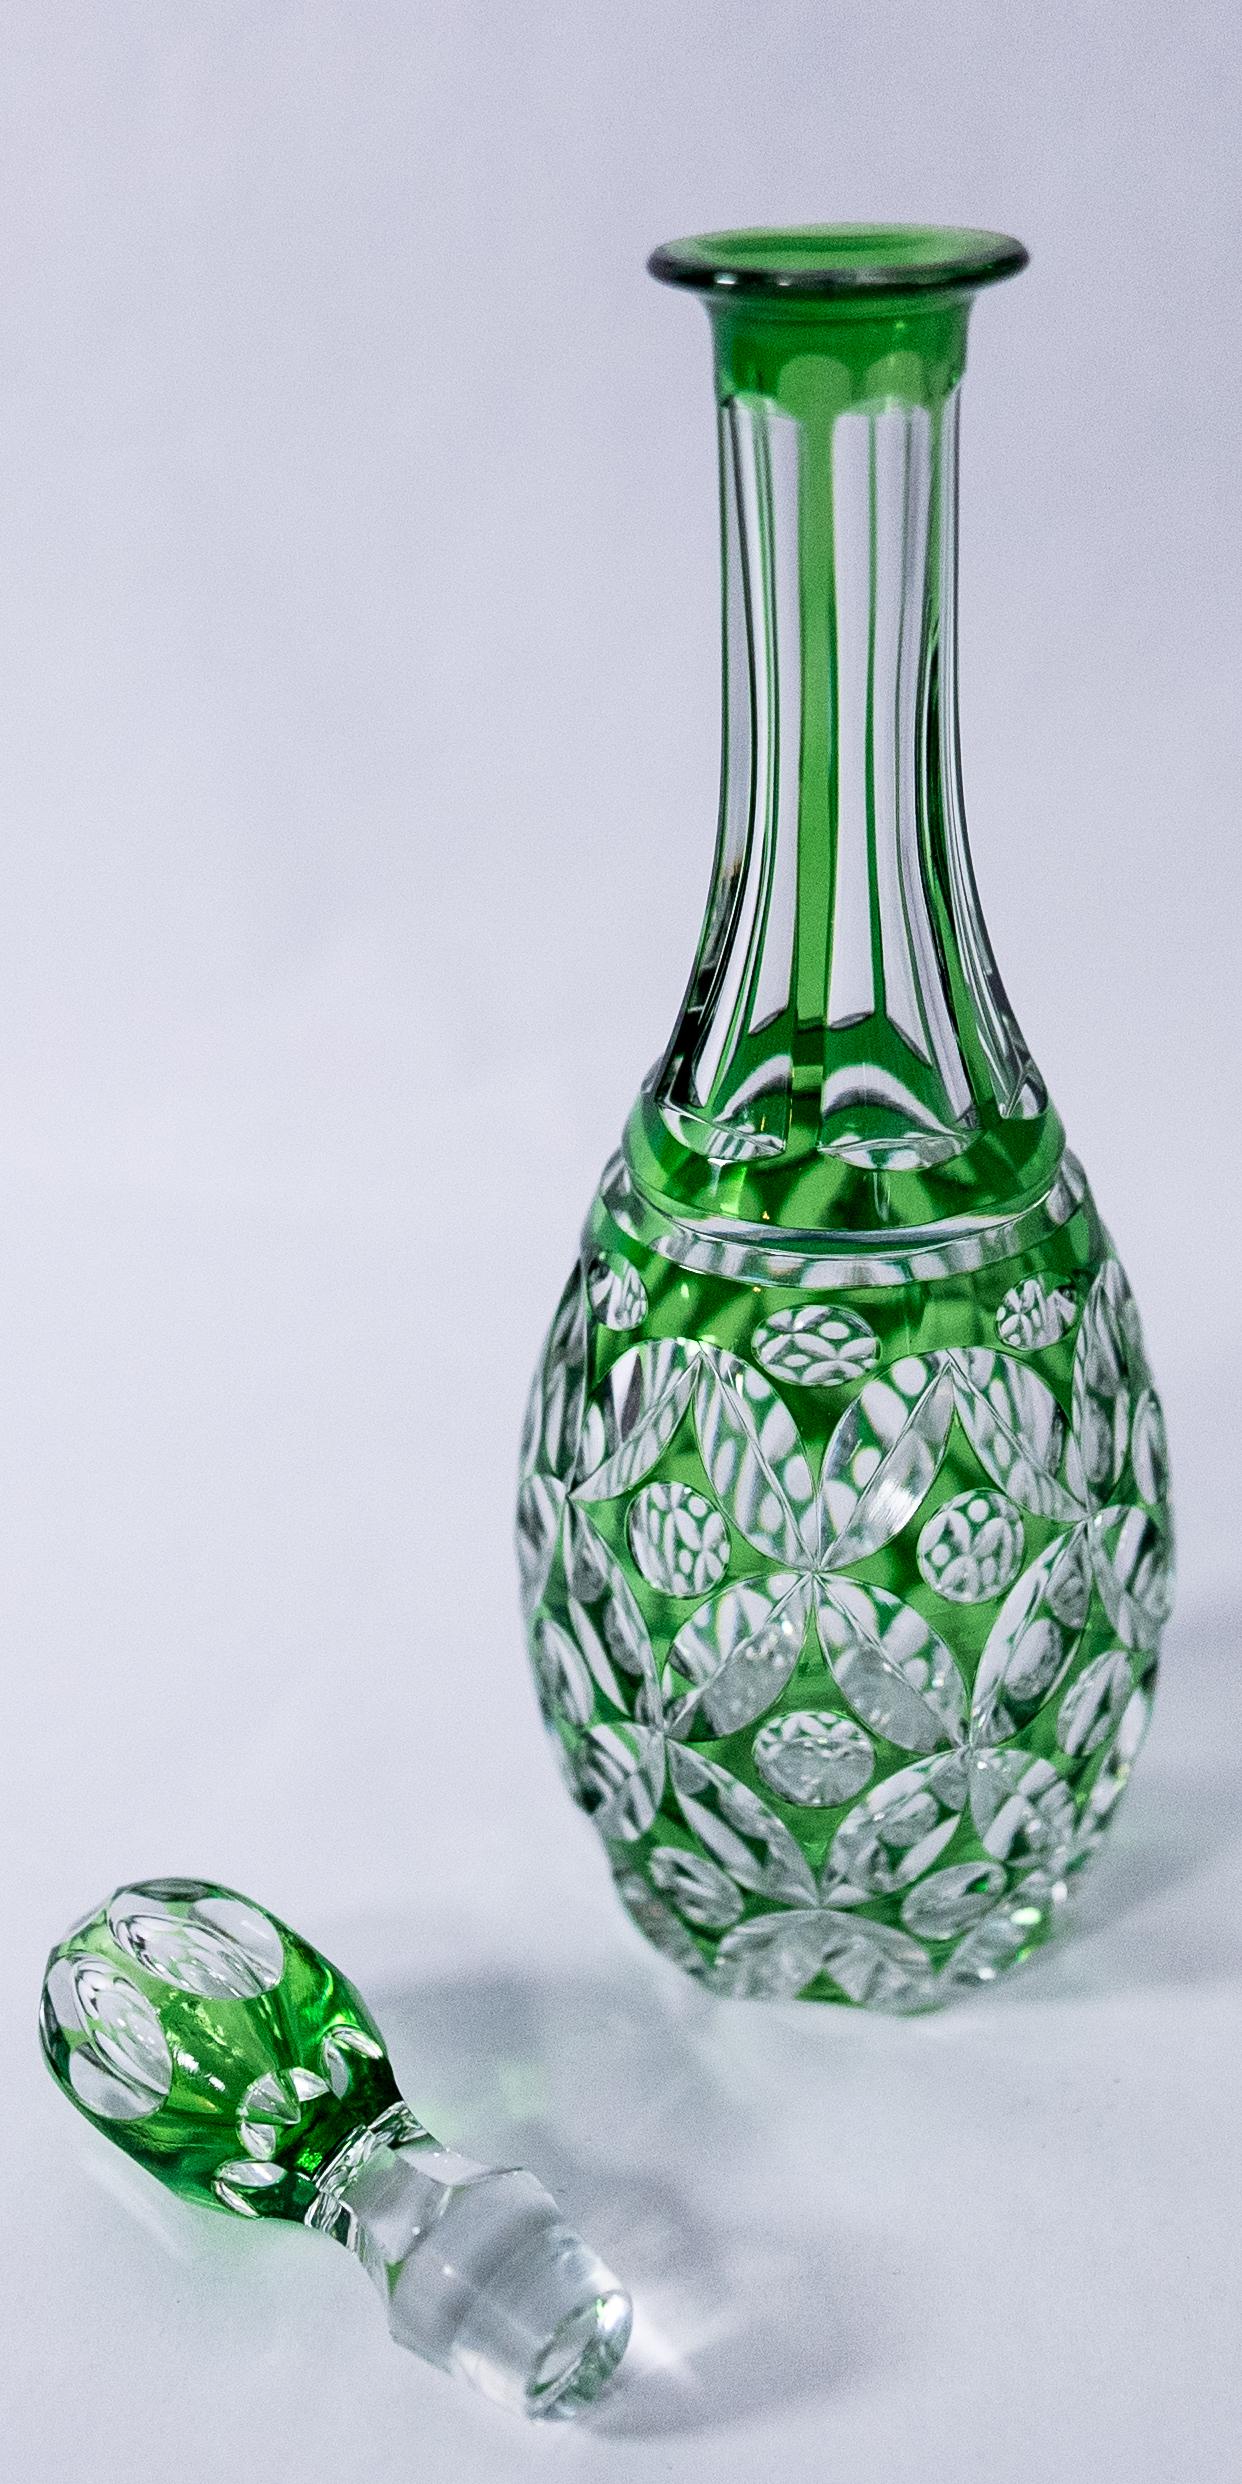 A vibrant green cased and cut to clear decanter by the storied Belgium crystal firm Val St Lambert. This decanter has great proportions and crisply cut design on body and its original stopper. In very nice antique condition and ready for your